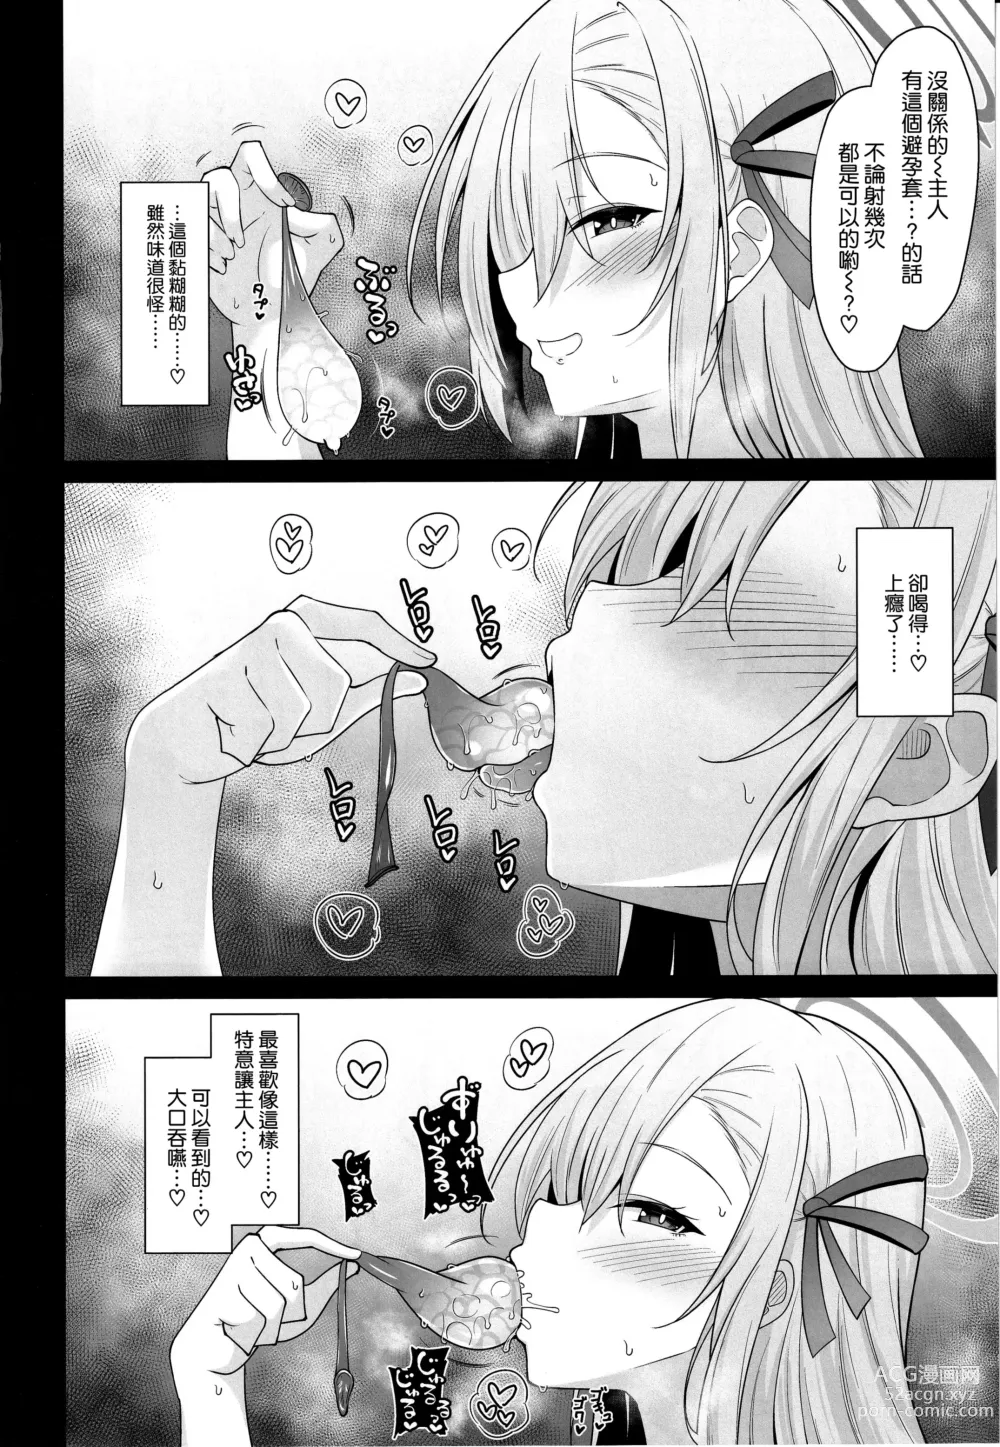 Page 16 of doujinshi The Motive is Somehow